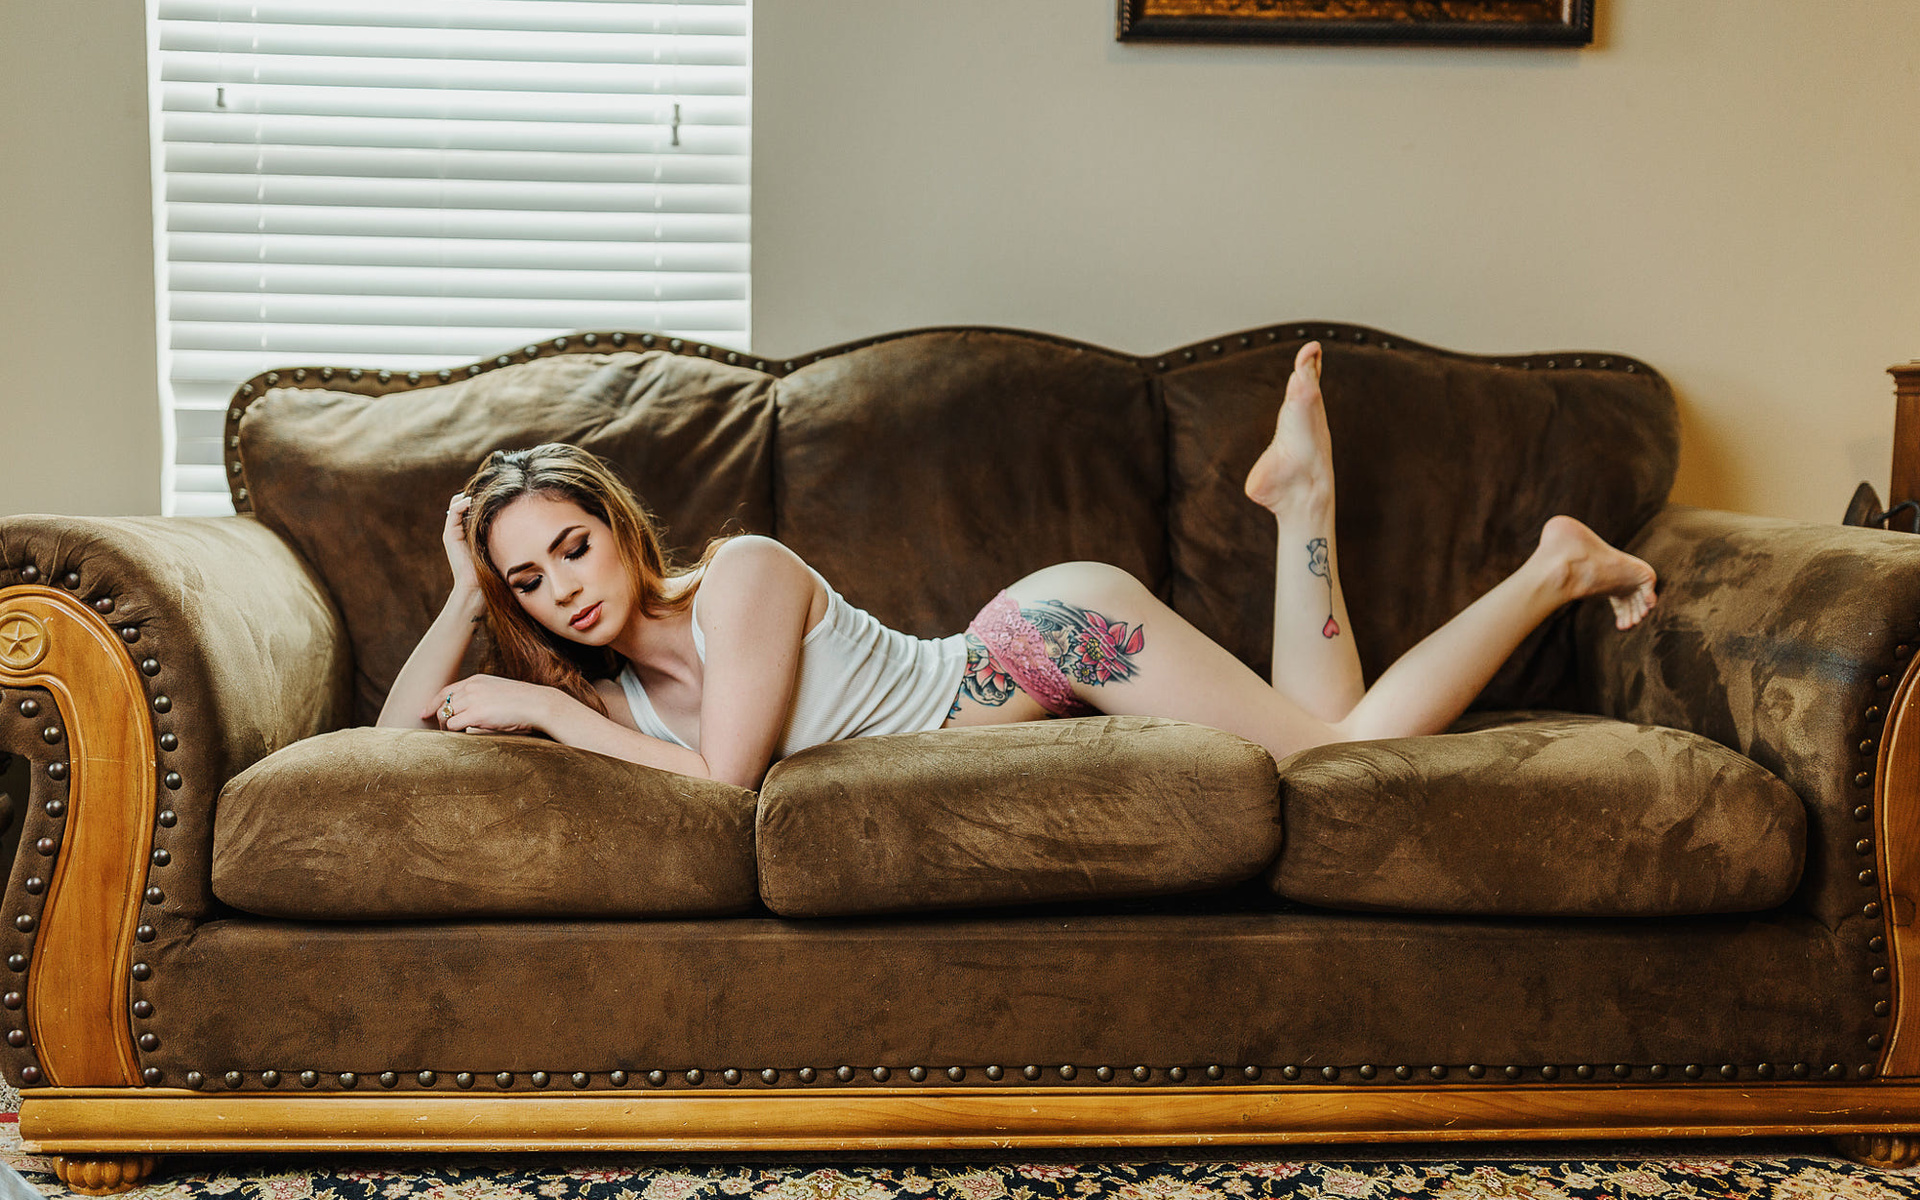 women, couch, ass, pink panties, tank top, tattoo, blinds, closed eyes